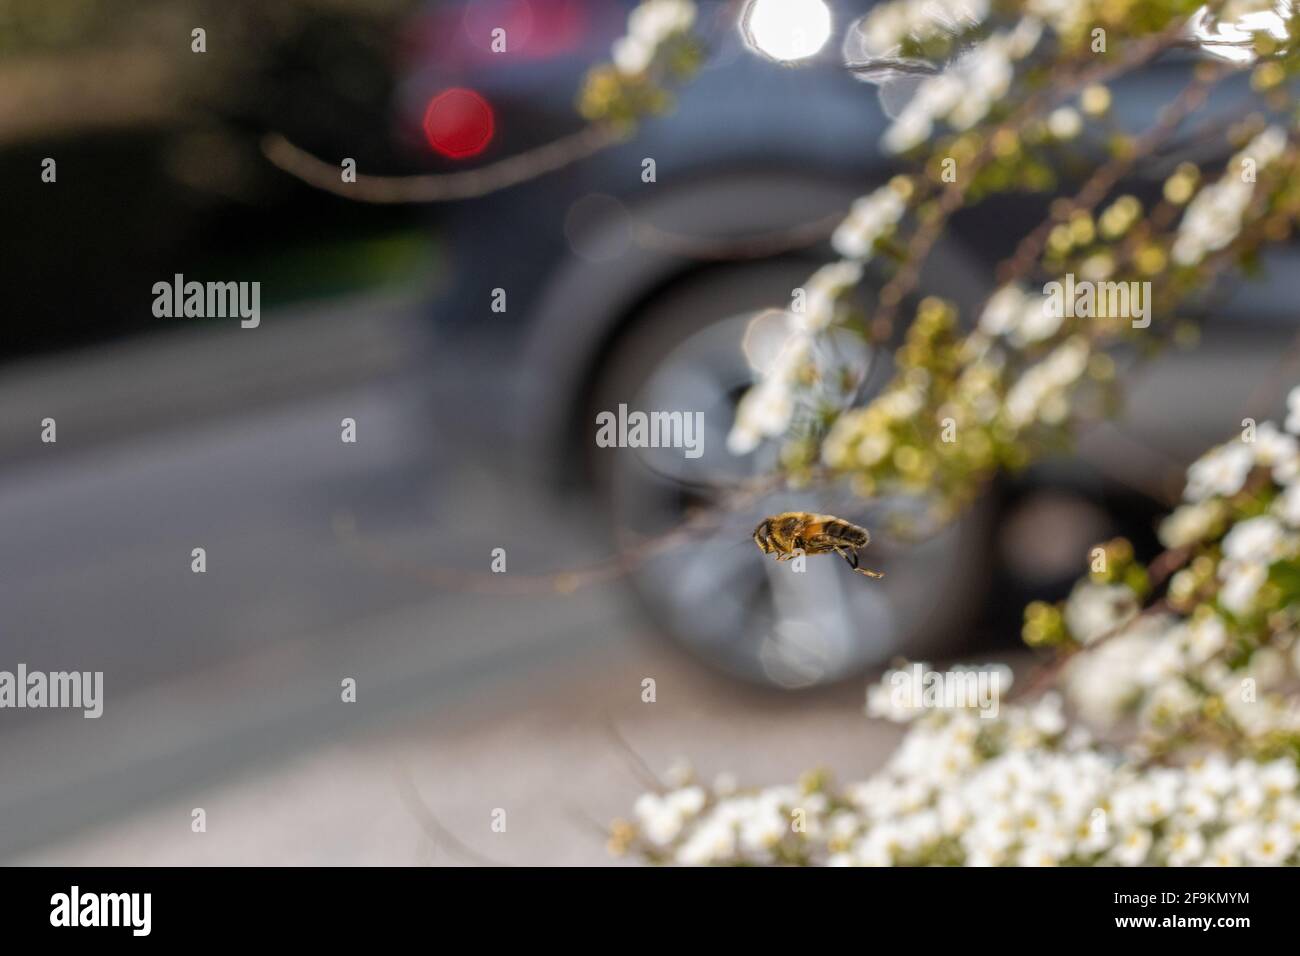 UK urban wildlife: Common Drone Fly - Eristalis tenax - in flight in a front garden with a car in the background Stock Photo